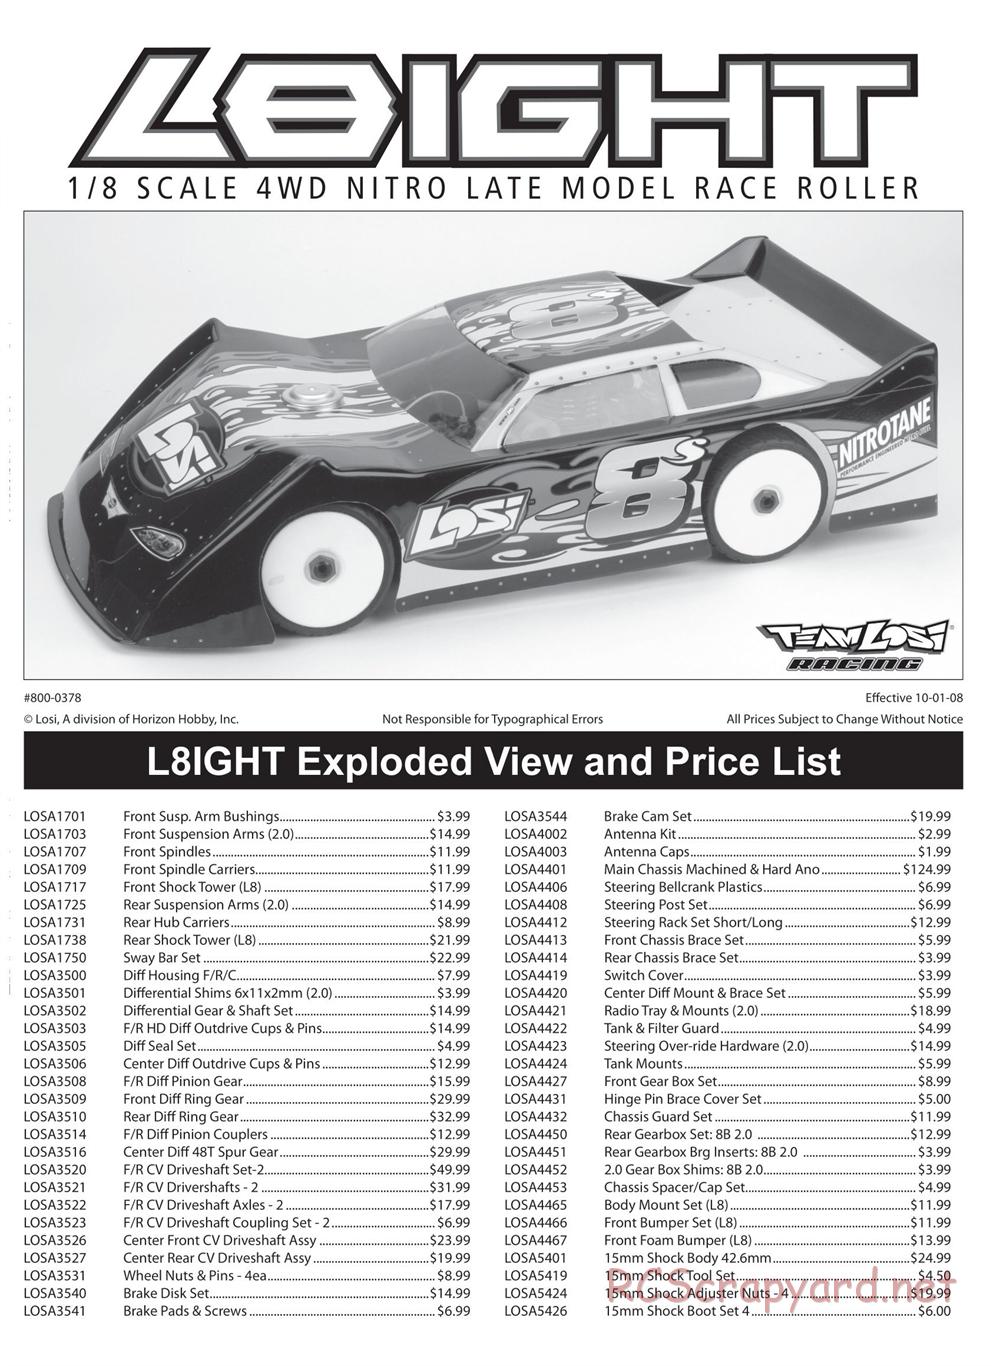 Team Losi - L8ight - Race Roller - Manual - Page 1